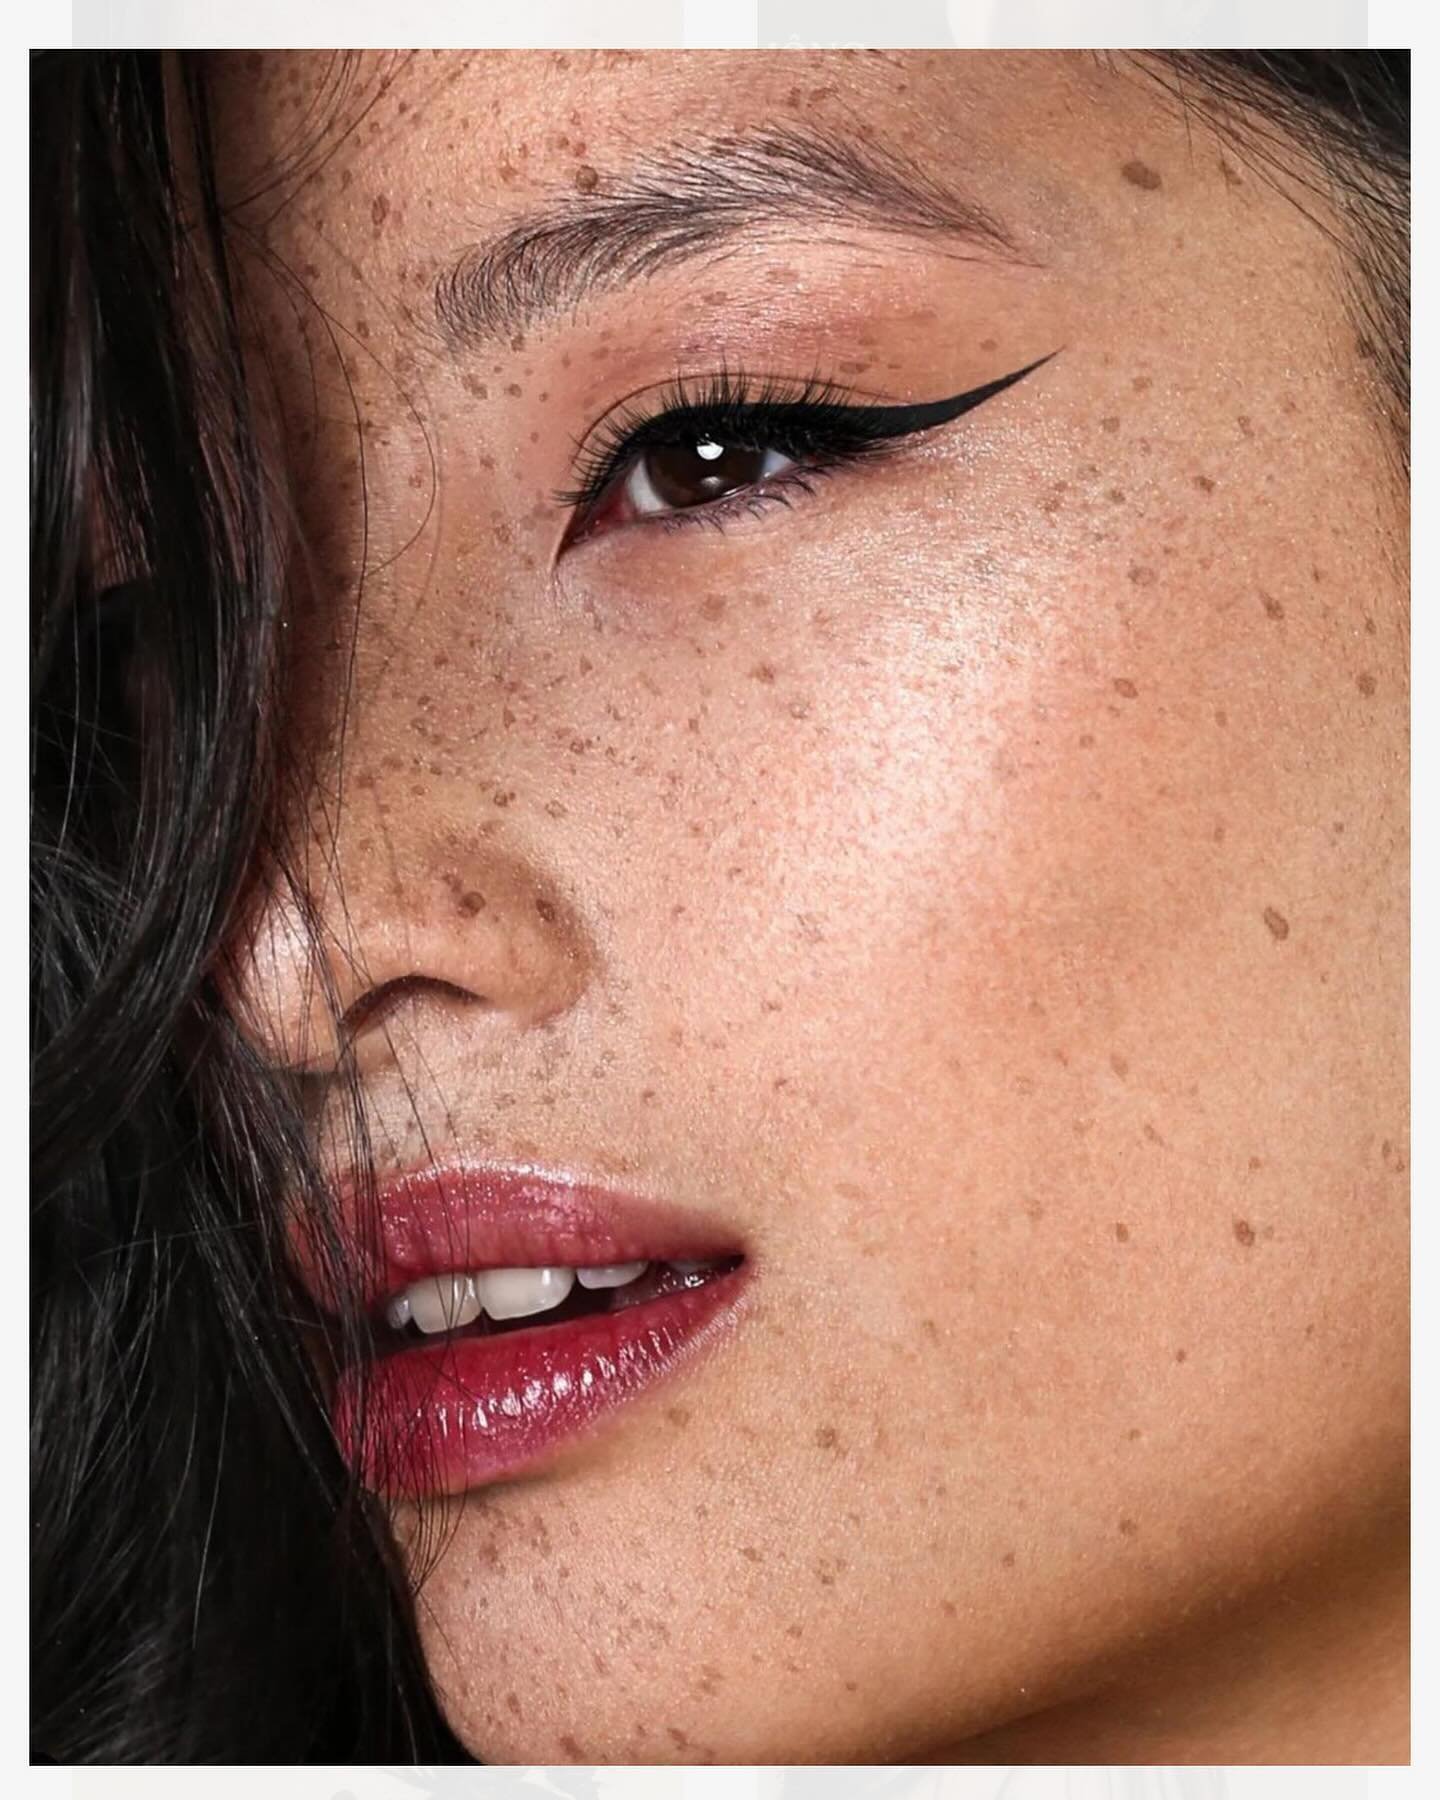 LANA our new asian International face @mbmodelmanagement with her Agency in Germany 🤍

Come in and check her book @mbmodelmanagement 
www.mbmodelmanagement.com

#editorial #modelwork #fashionmagazine #fashioneditorial #fashionstyle #fashion #fashion